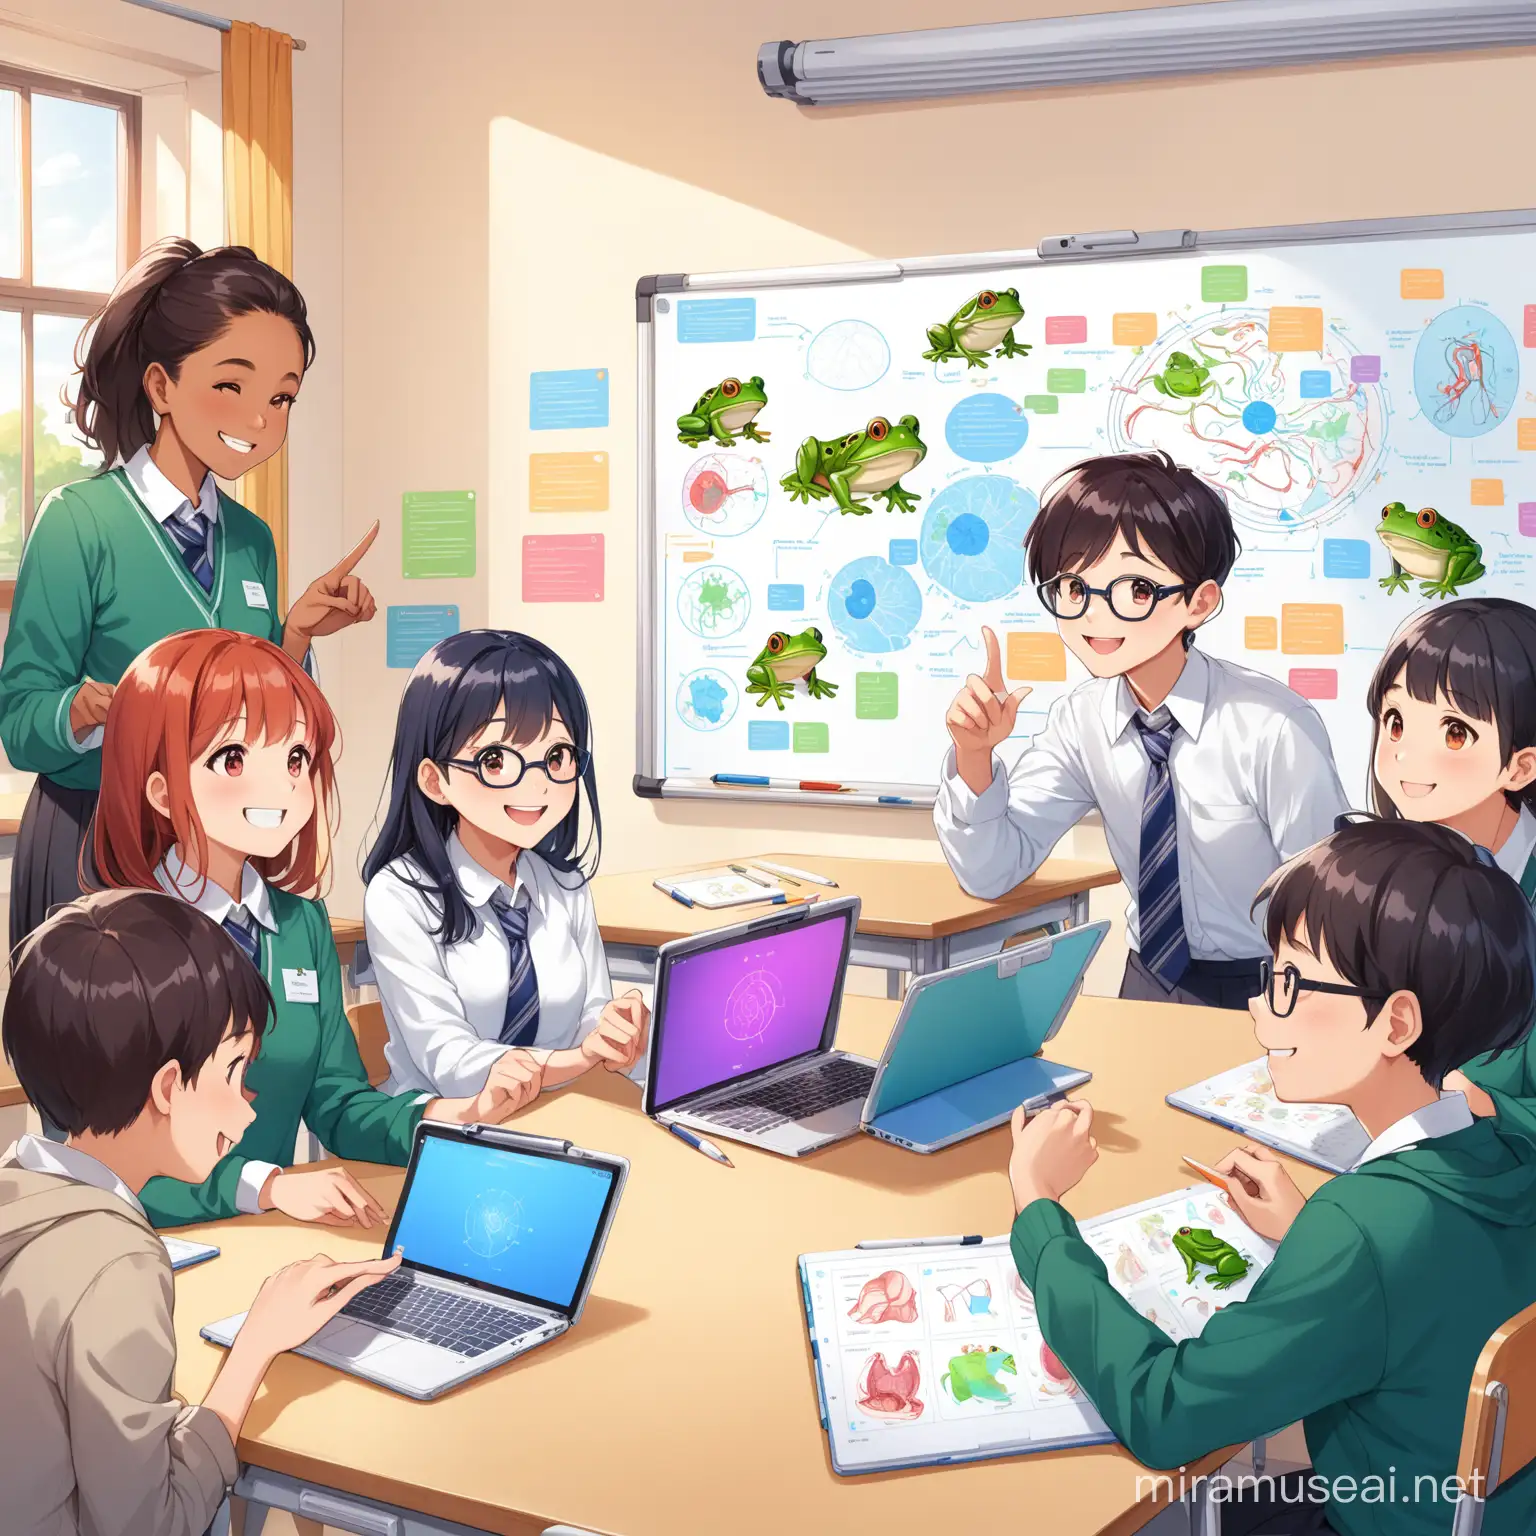 A bright and colorful cartoon classroom with 7 students from different backgrounds sitting around tables engaged in learning. 3 students are huddled together, excitedly using tablets to explore a 3D model of a frog's anatomy. The other 4 students are using laptops, some smiling and focused as they work on individual tasks. In the front of the classroom, a friendly teacher stands beside a whiteboard filled with colorful diagrams. The teacher gestures towards the board with a smile, clearly explaining a new and innovative teaching method that allows students to learn at their own pace and in ways that suit their preferred learning styles. make it simple and easy to trace

